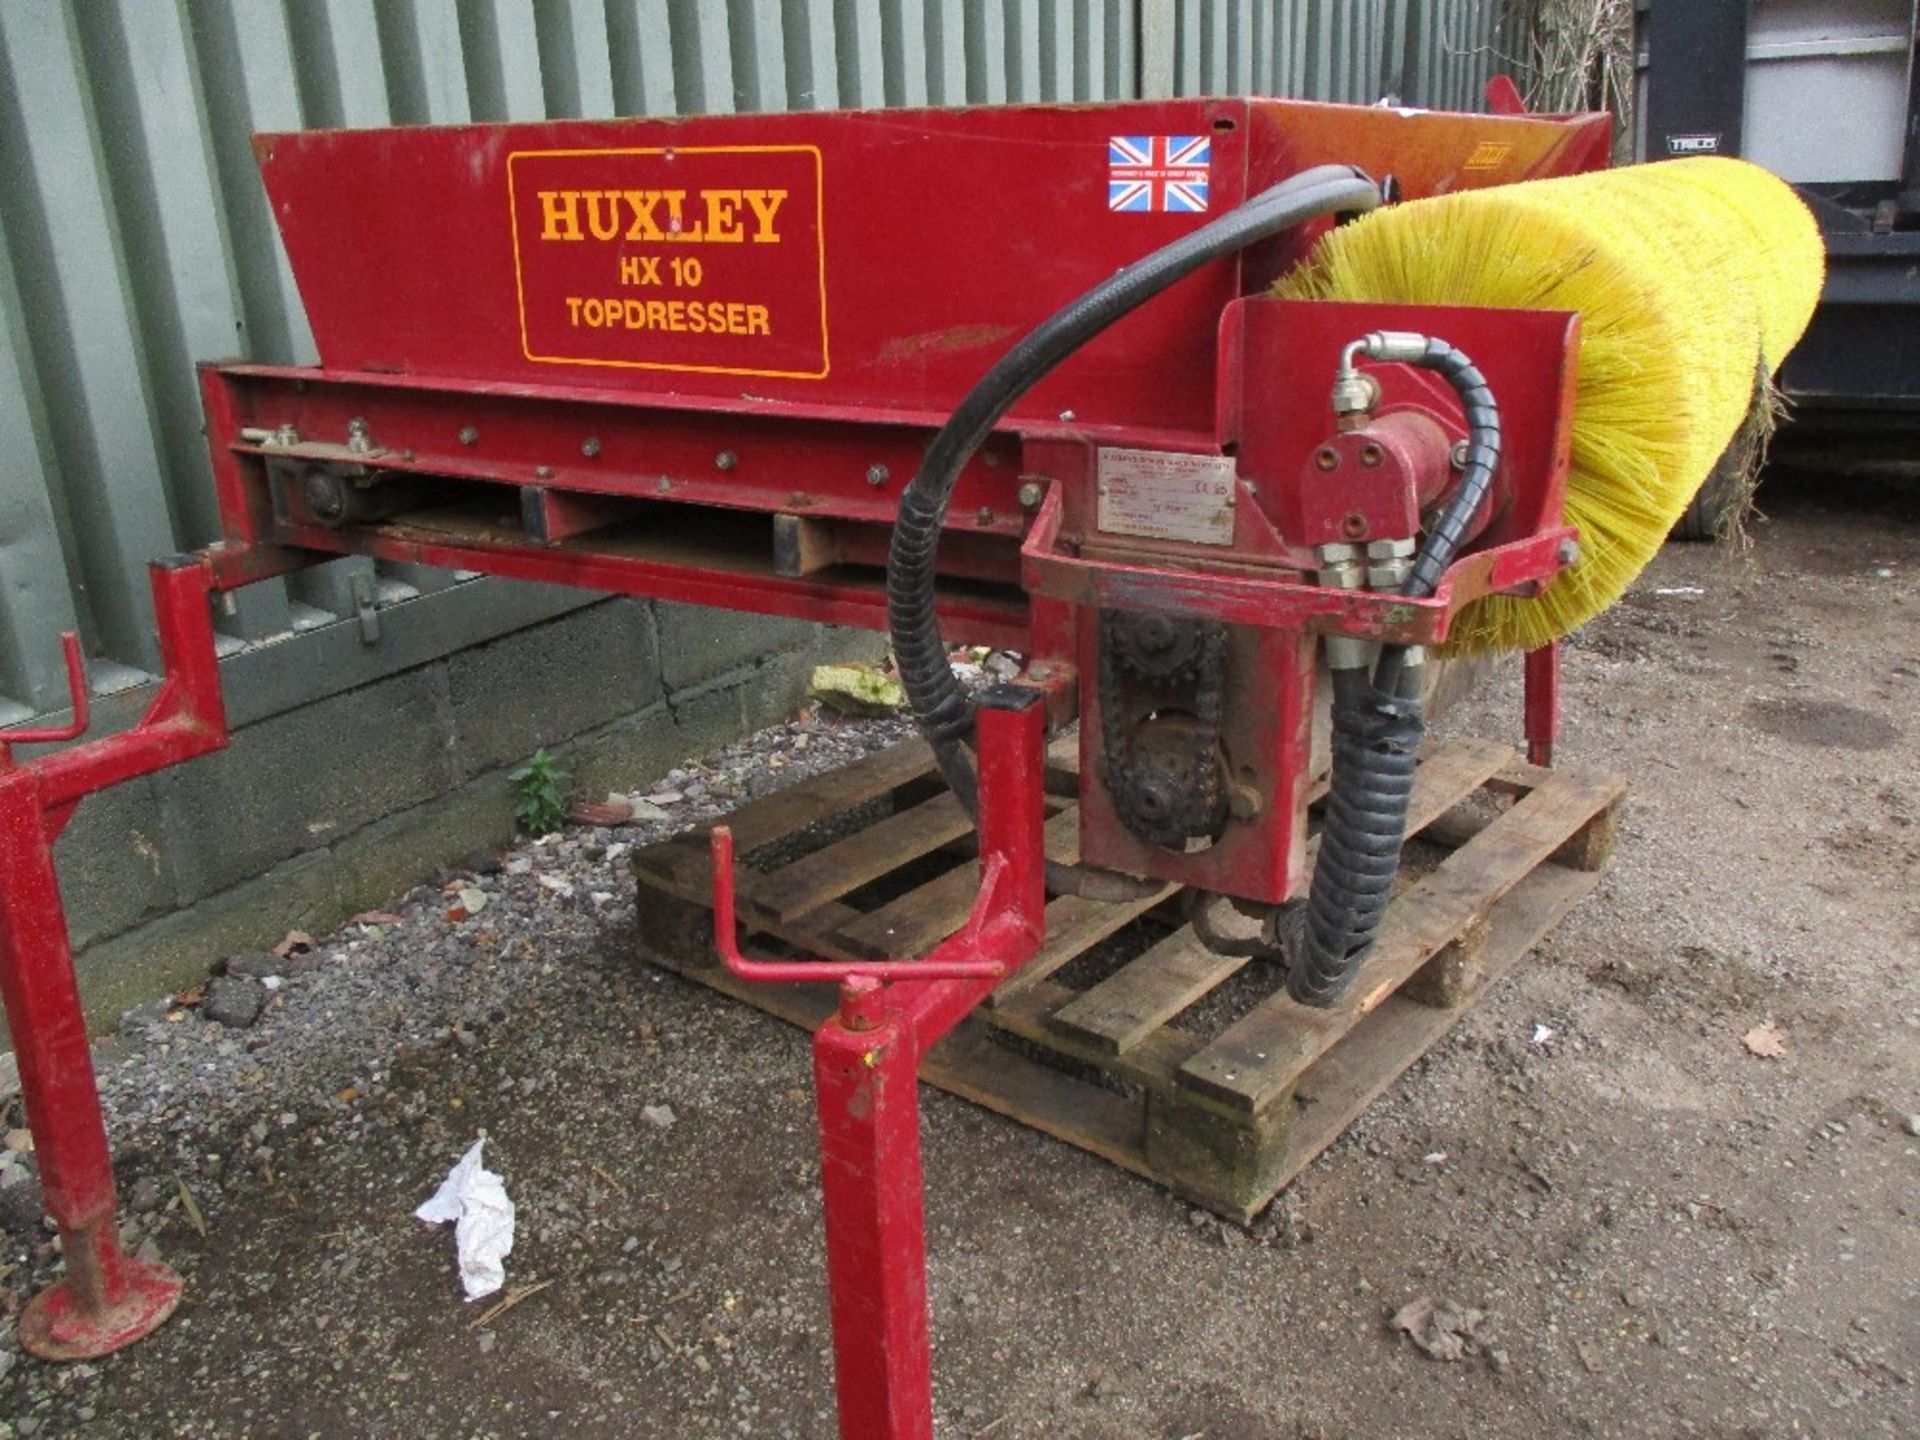 Huxley HX10 hydraulic topdresser to suit utility vehicle/compact tractor